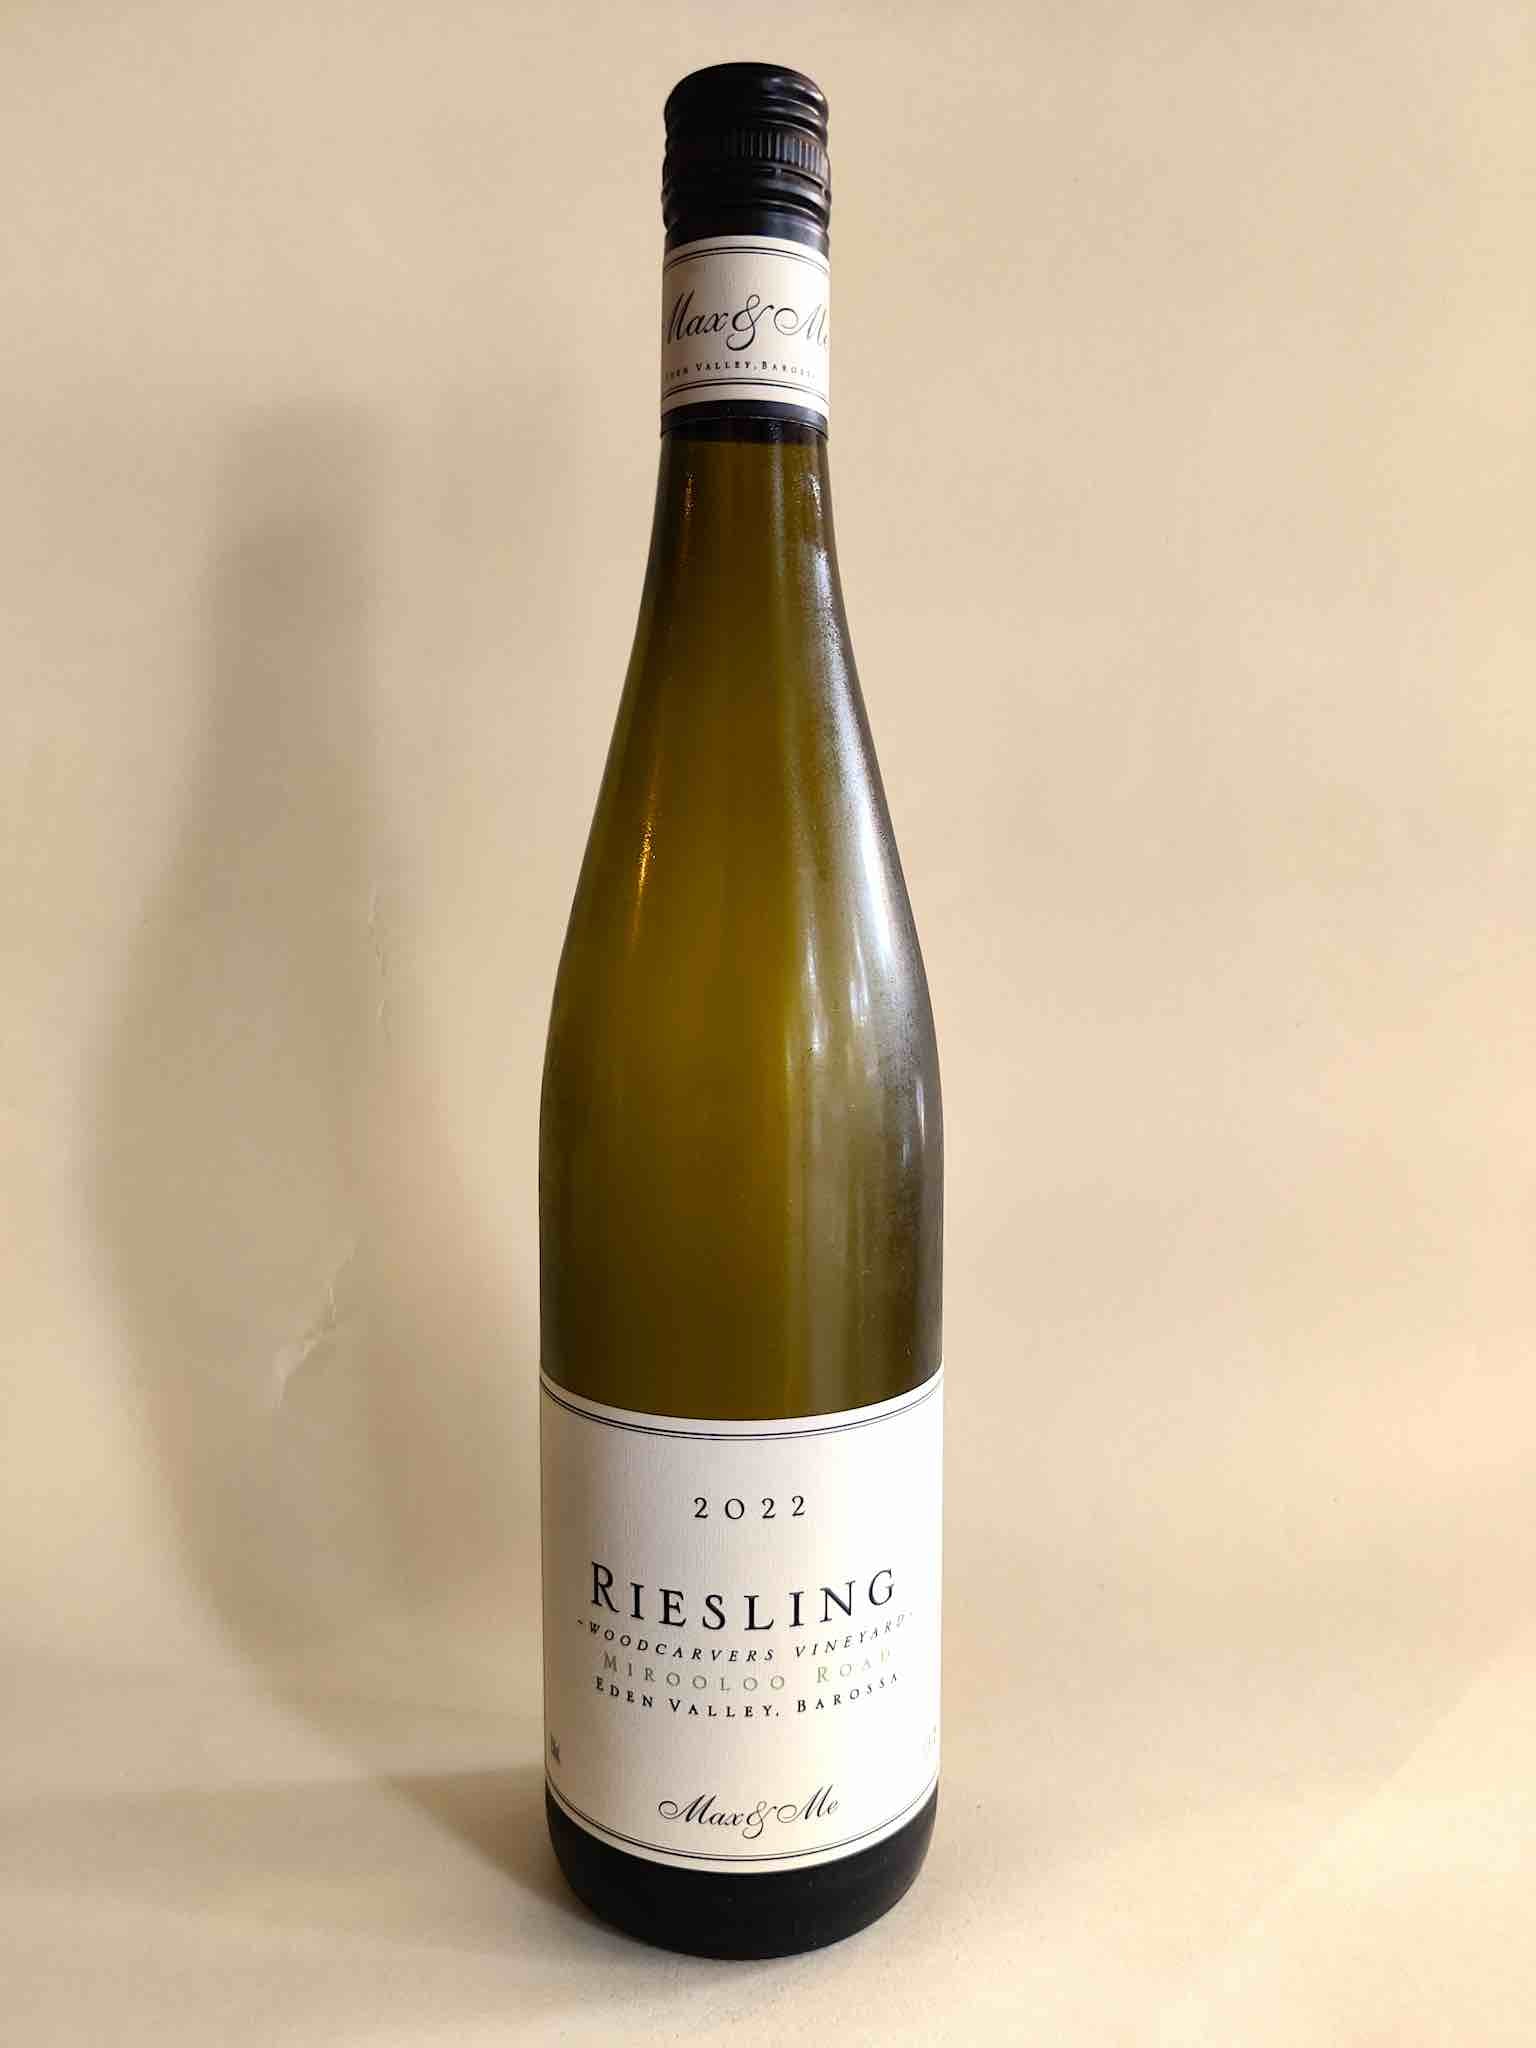 A bottle of 2022 Max & Me Mirooloo Road Riesling from Eden Valley, South Australia.